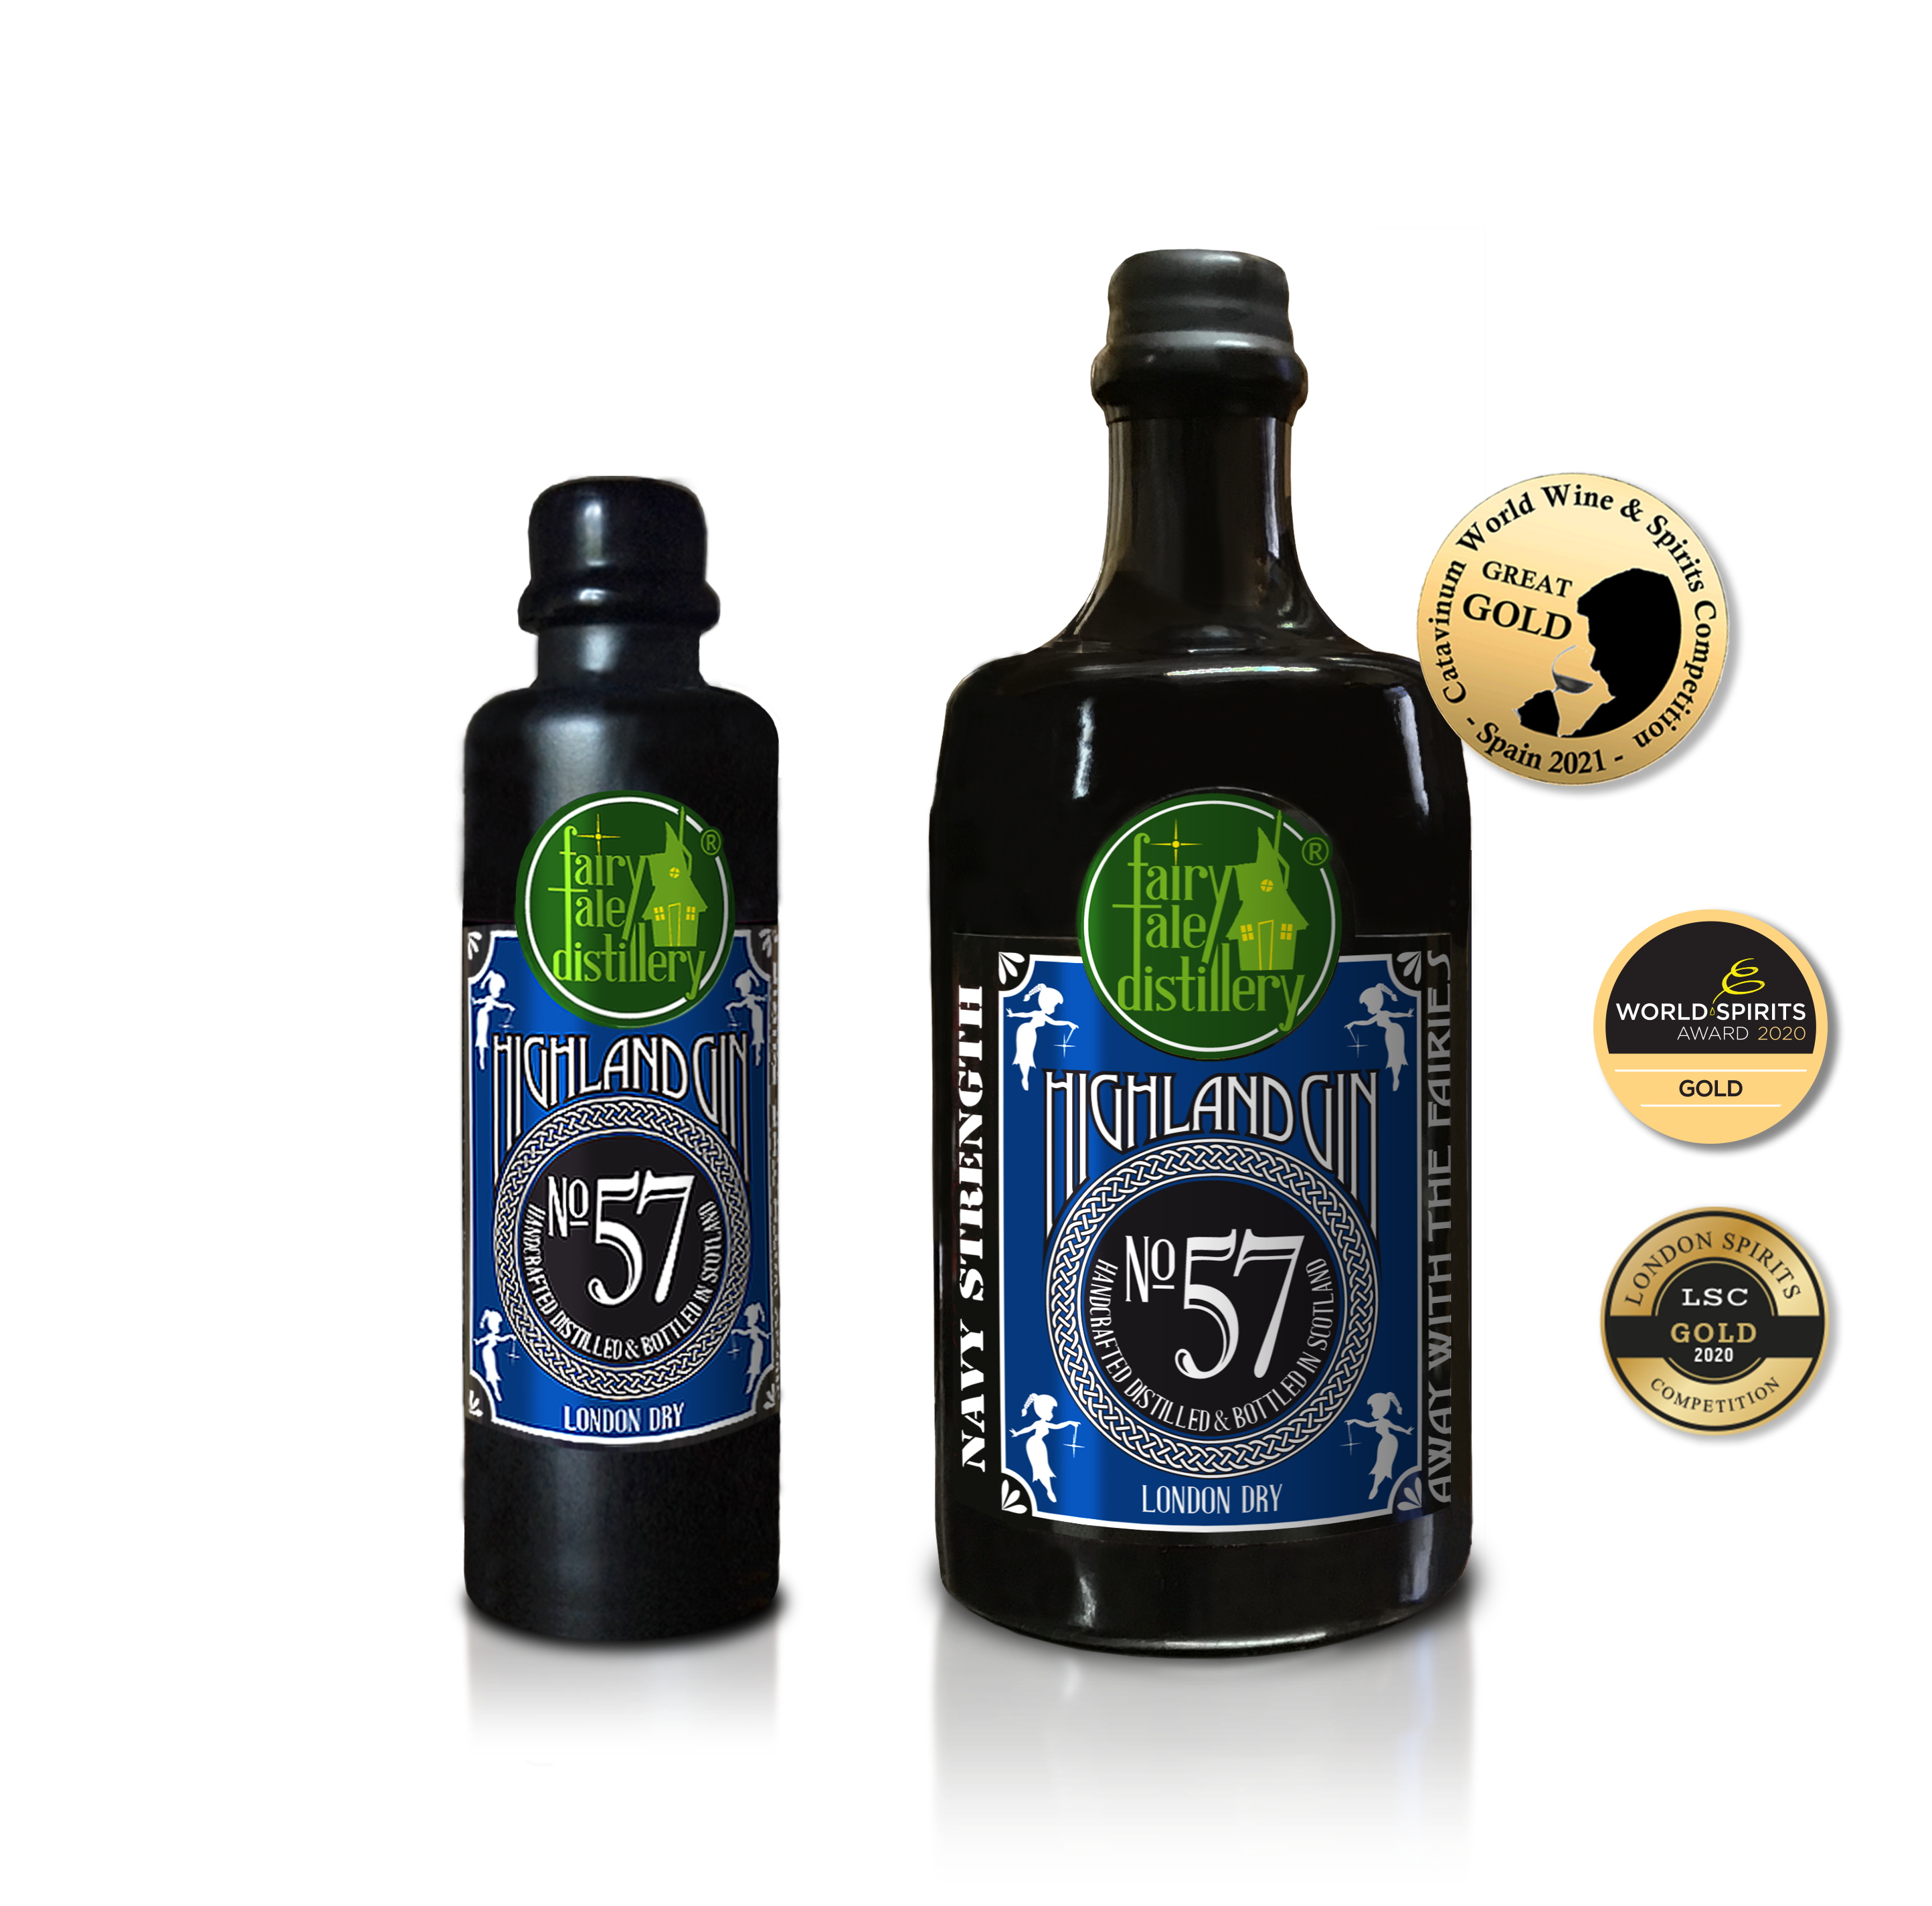 No 57 London Dry Highland Gin bottle from Fairytale Distillery with London Spirits Competition 2020 Gold - Catavinum World Wine & Spirits Competetion Spain 2021 Great Gold - World Spirits Award 2020 Gold